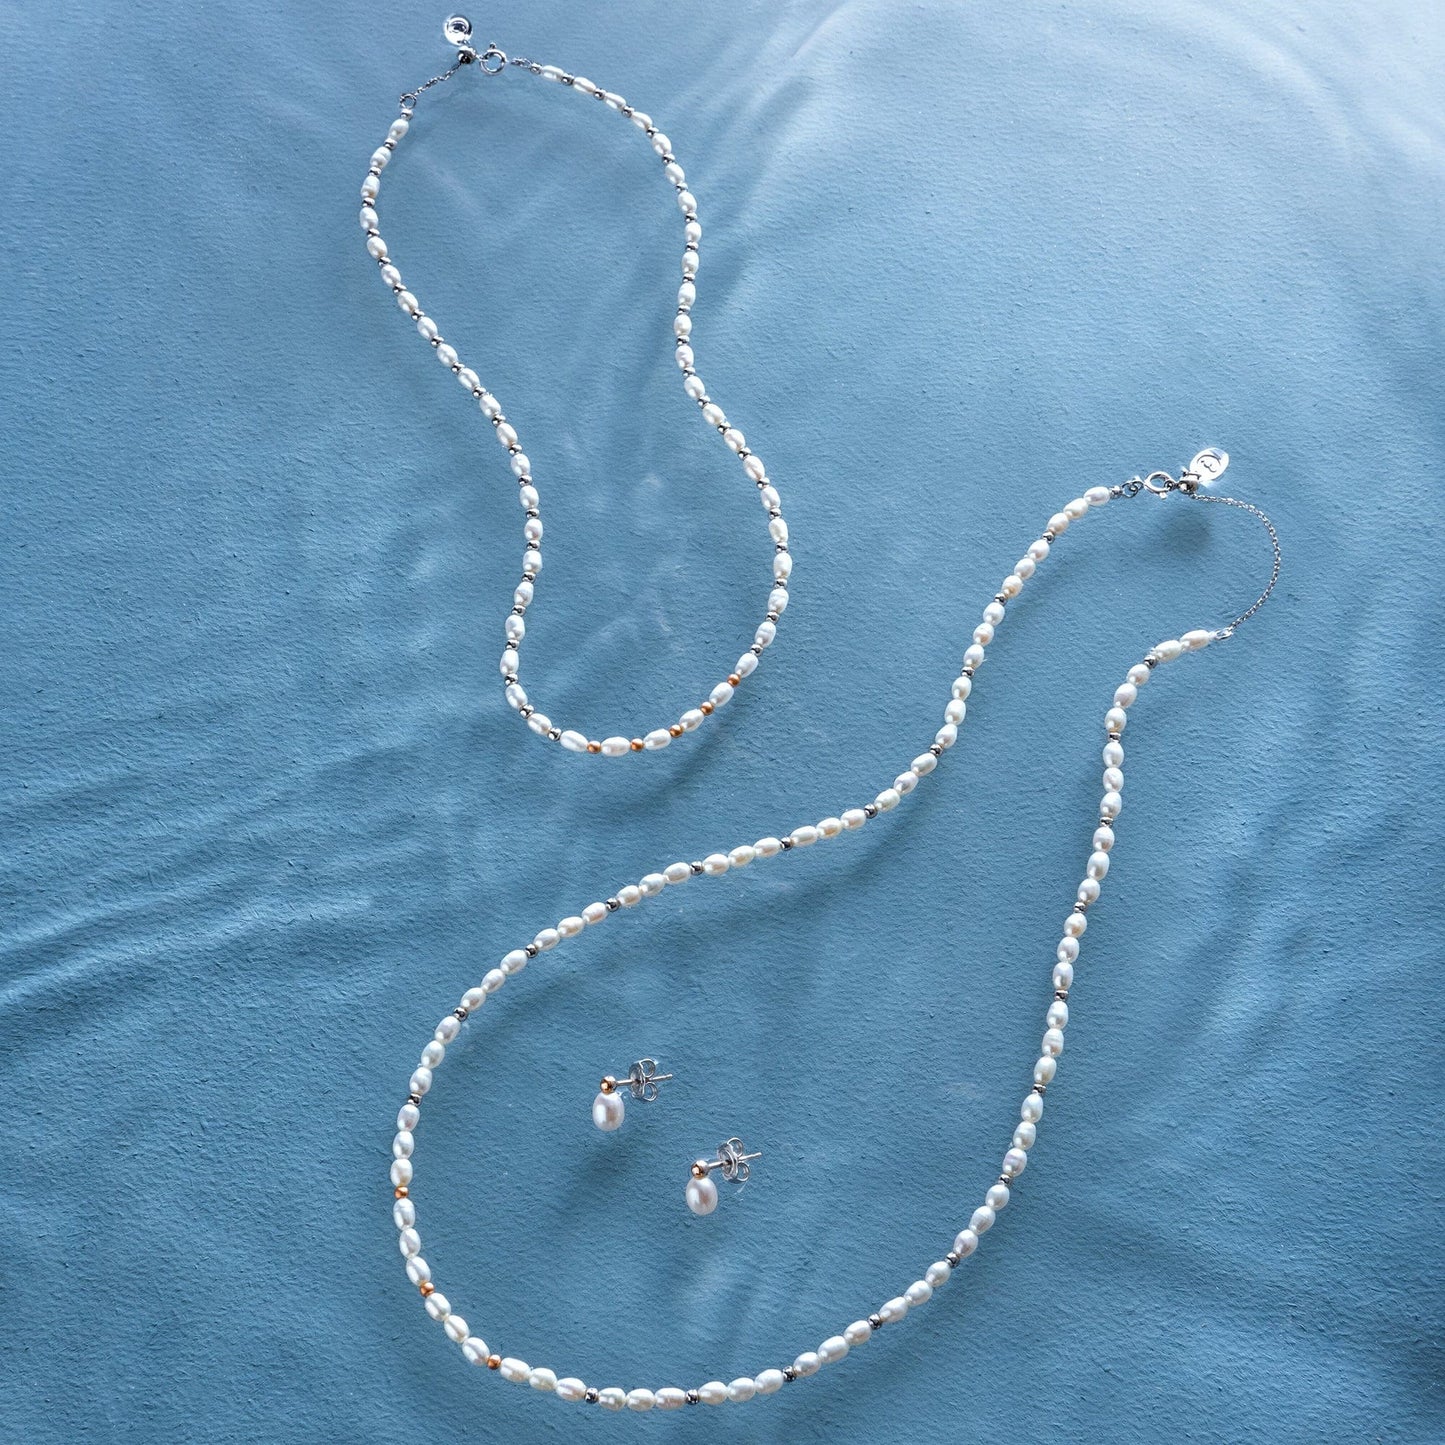 Beachcomber Silver and Pearl Choker